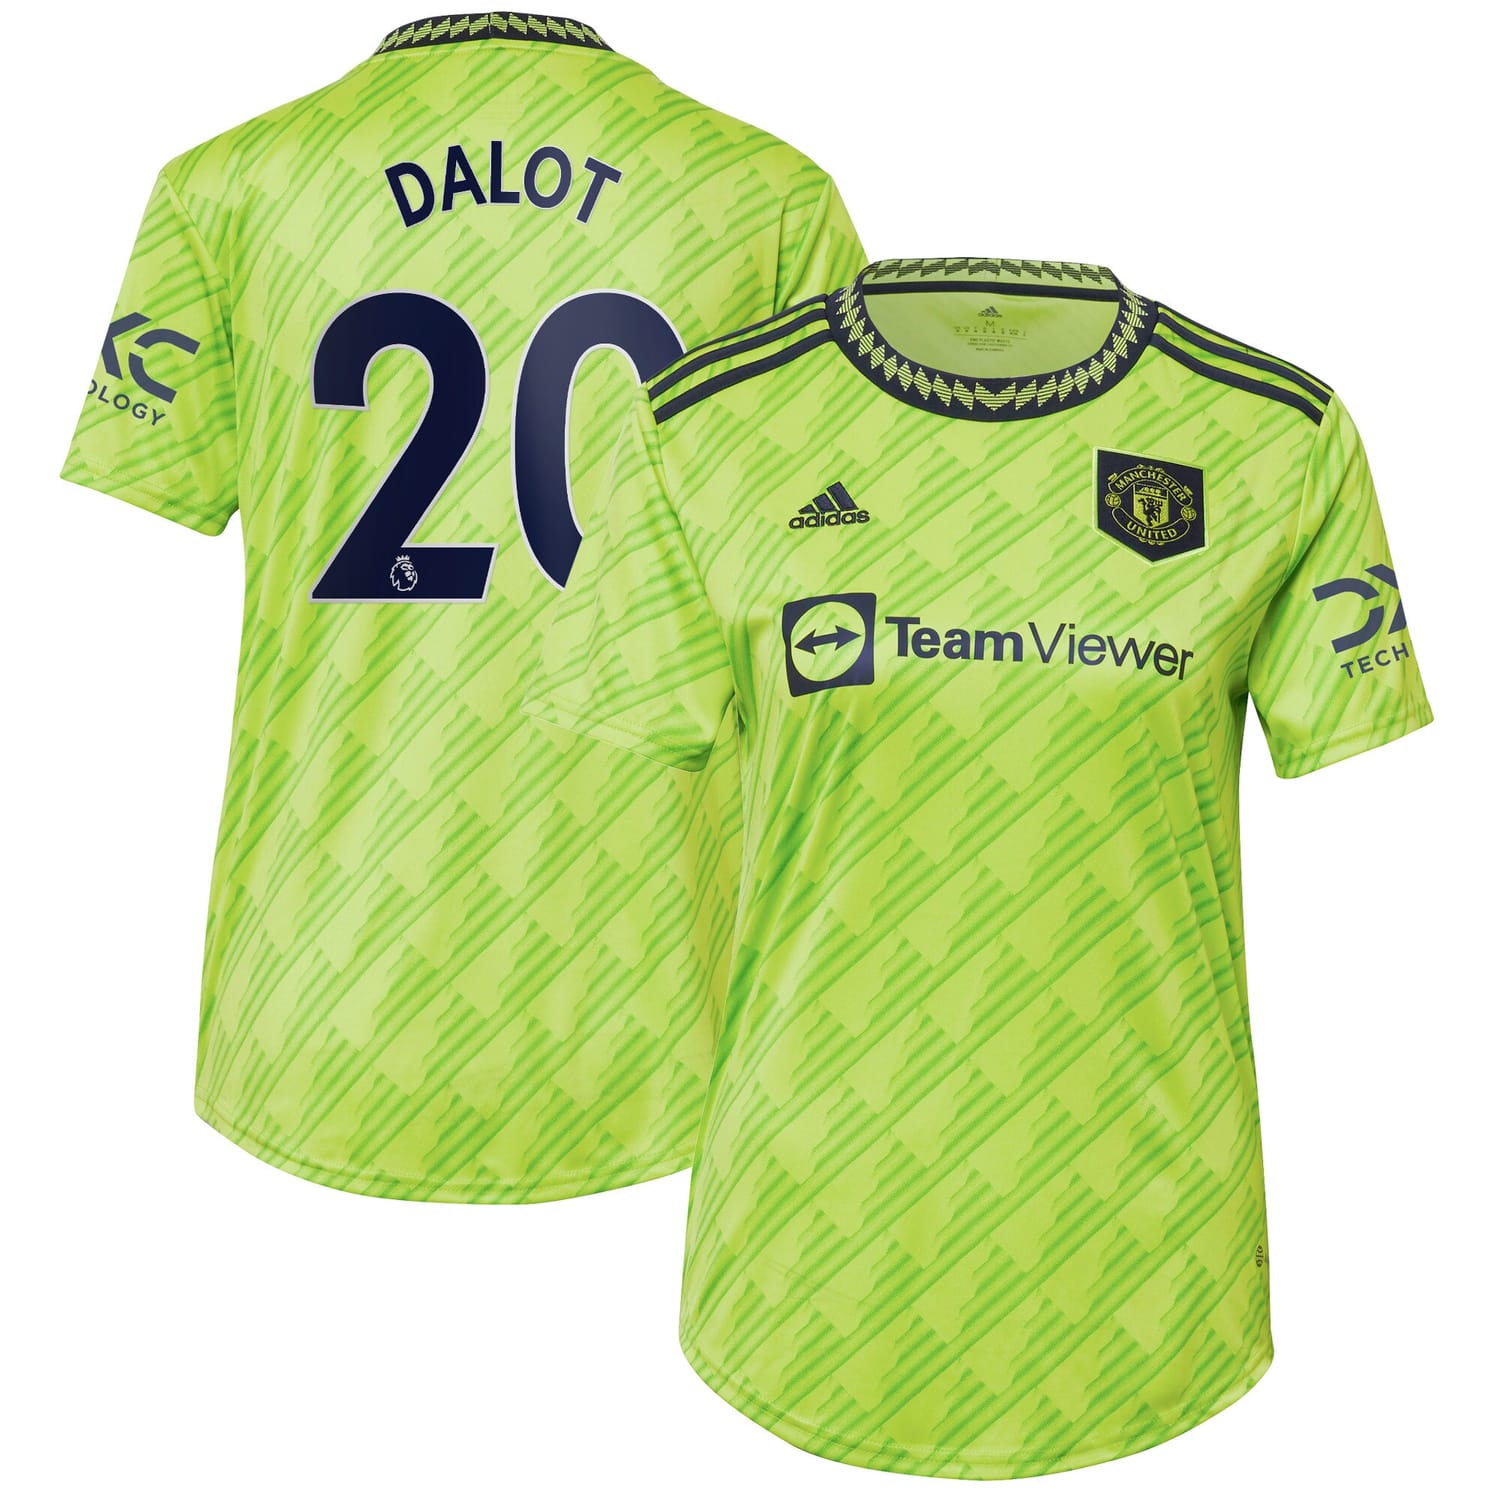 Premier League Manchester United Third Jersey Shirt Neon Green 2022-23 player Diogo Dalot printing for Women